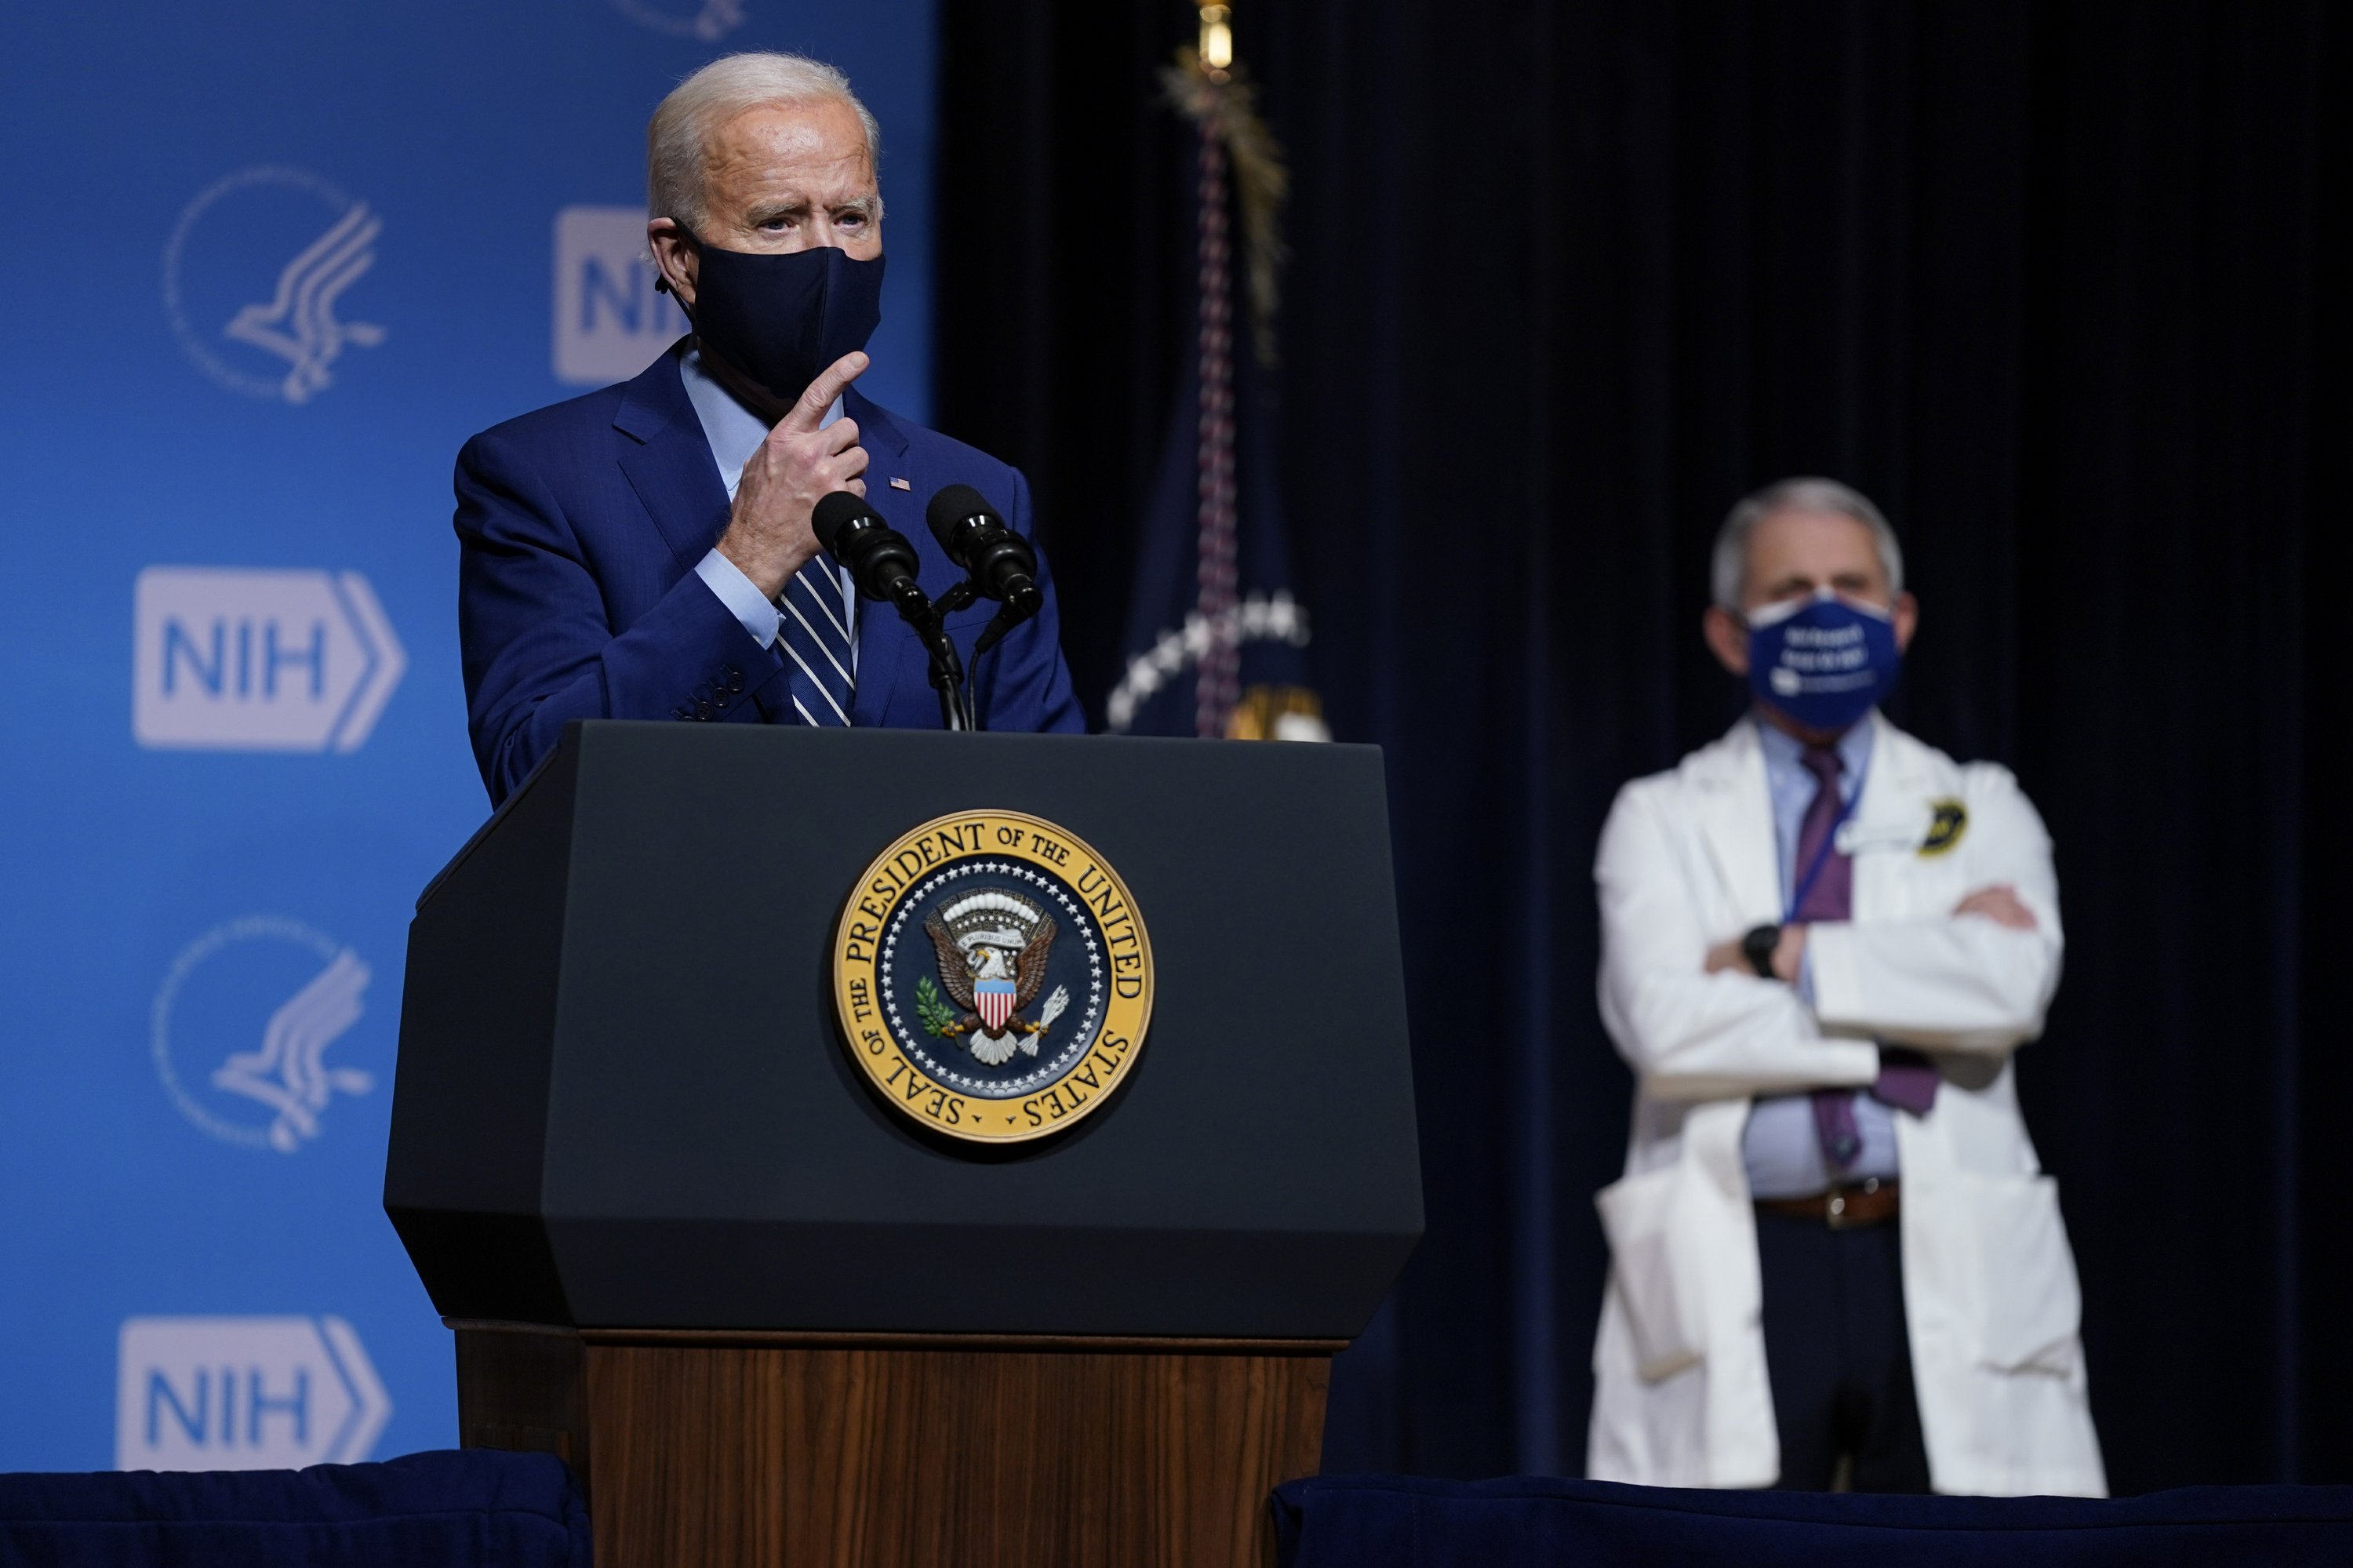 Biden says the US is guaranteeing 600 million doses of vaccine by July